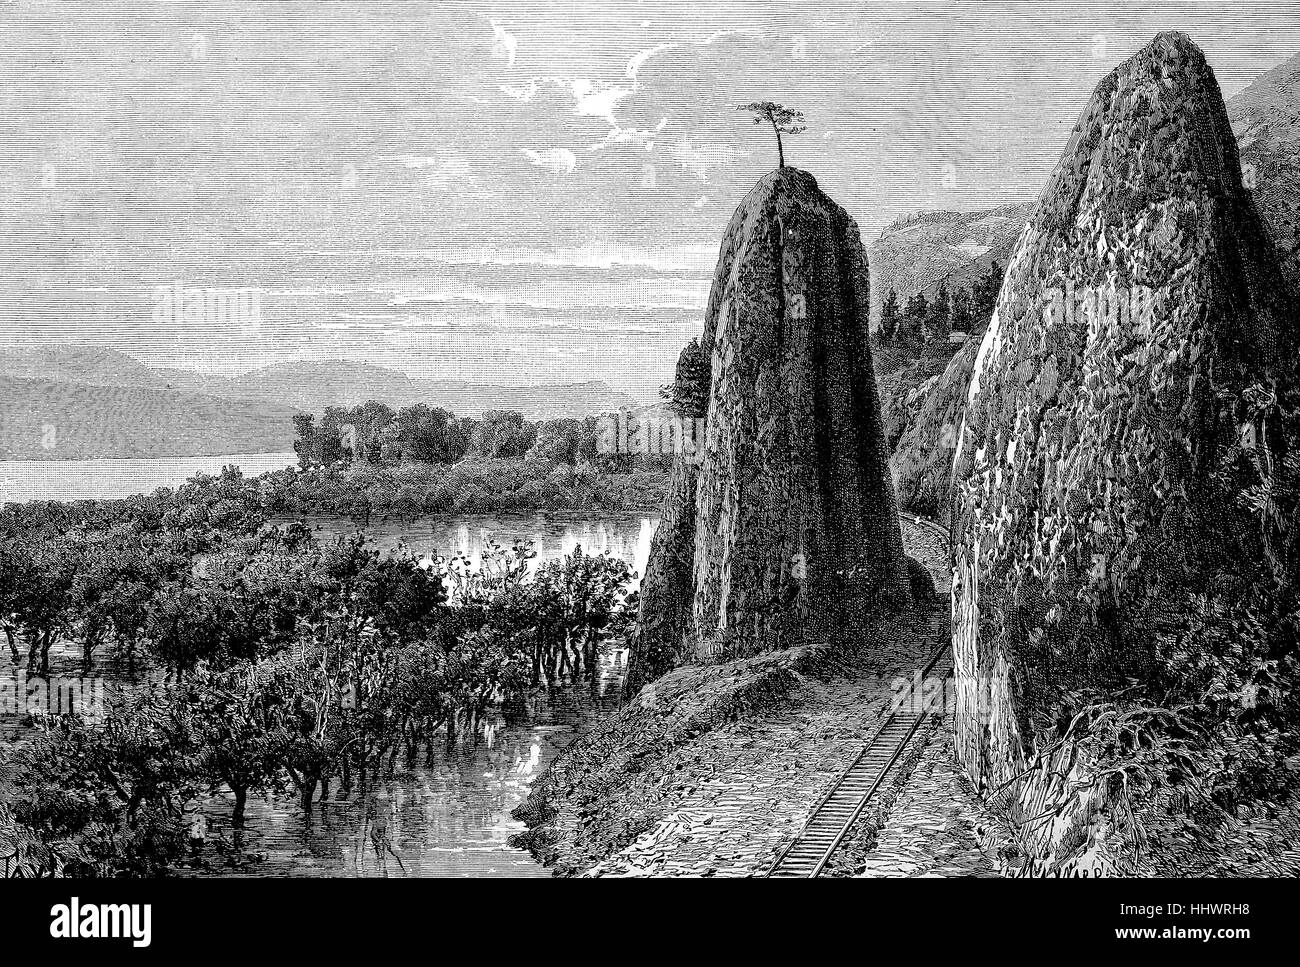 Rocks and railway rails at the Columbia River in the state of Washington in North America, historical image or illustration, published 1890, digital improved Stock Photo